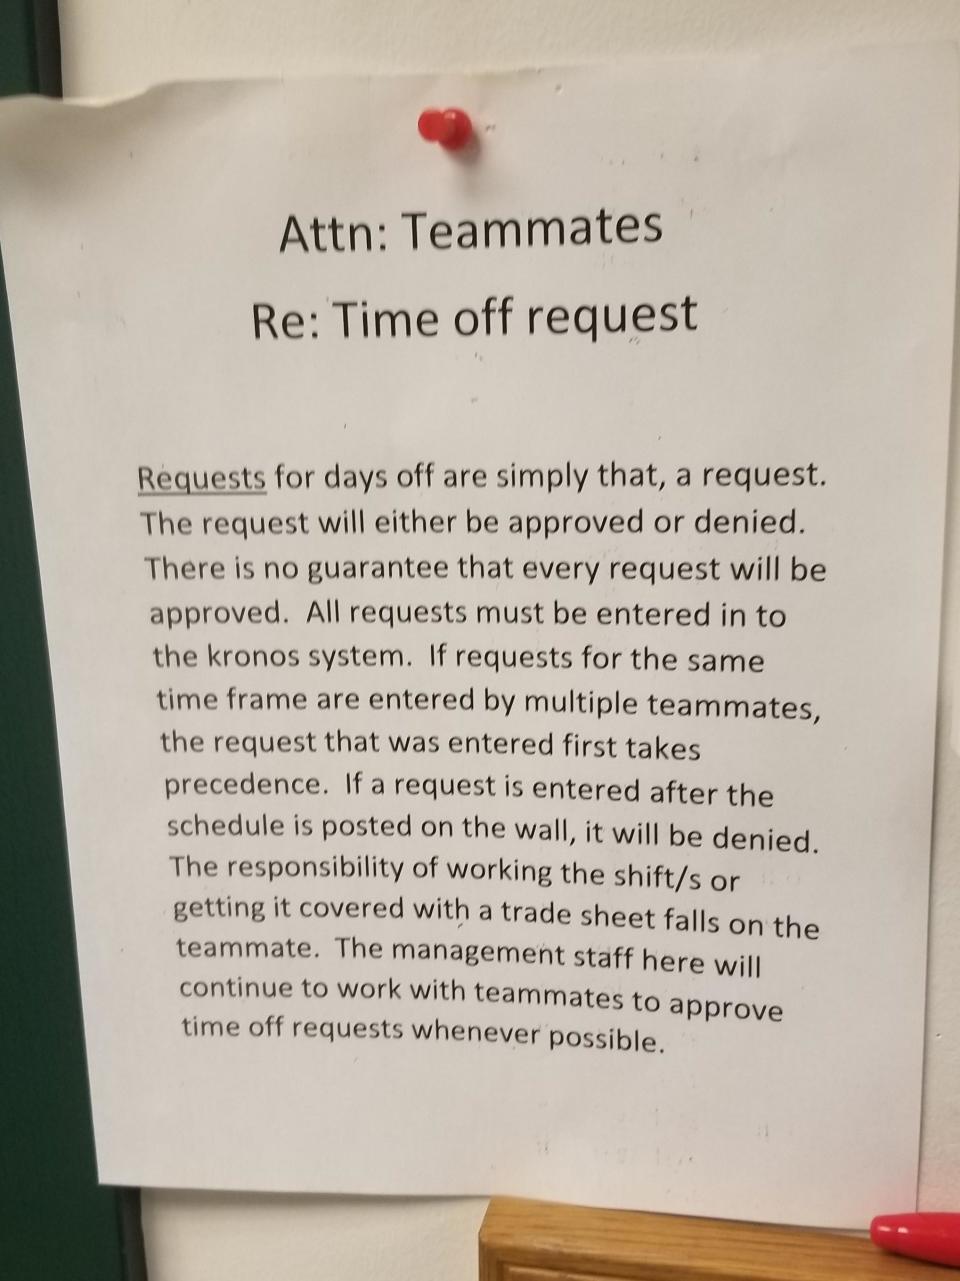 "Requests for days off are simply that, a request."